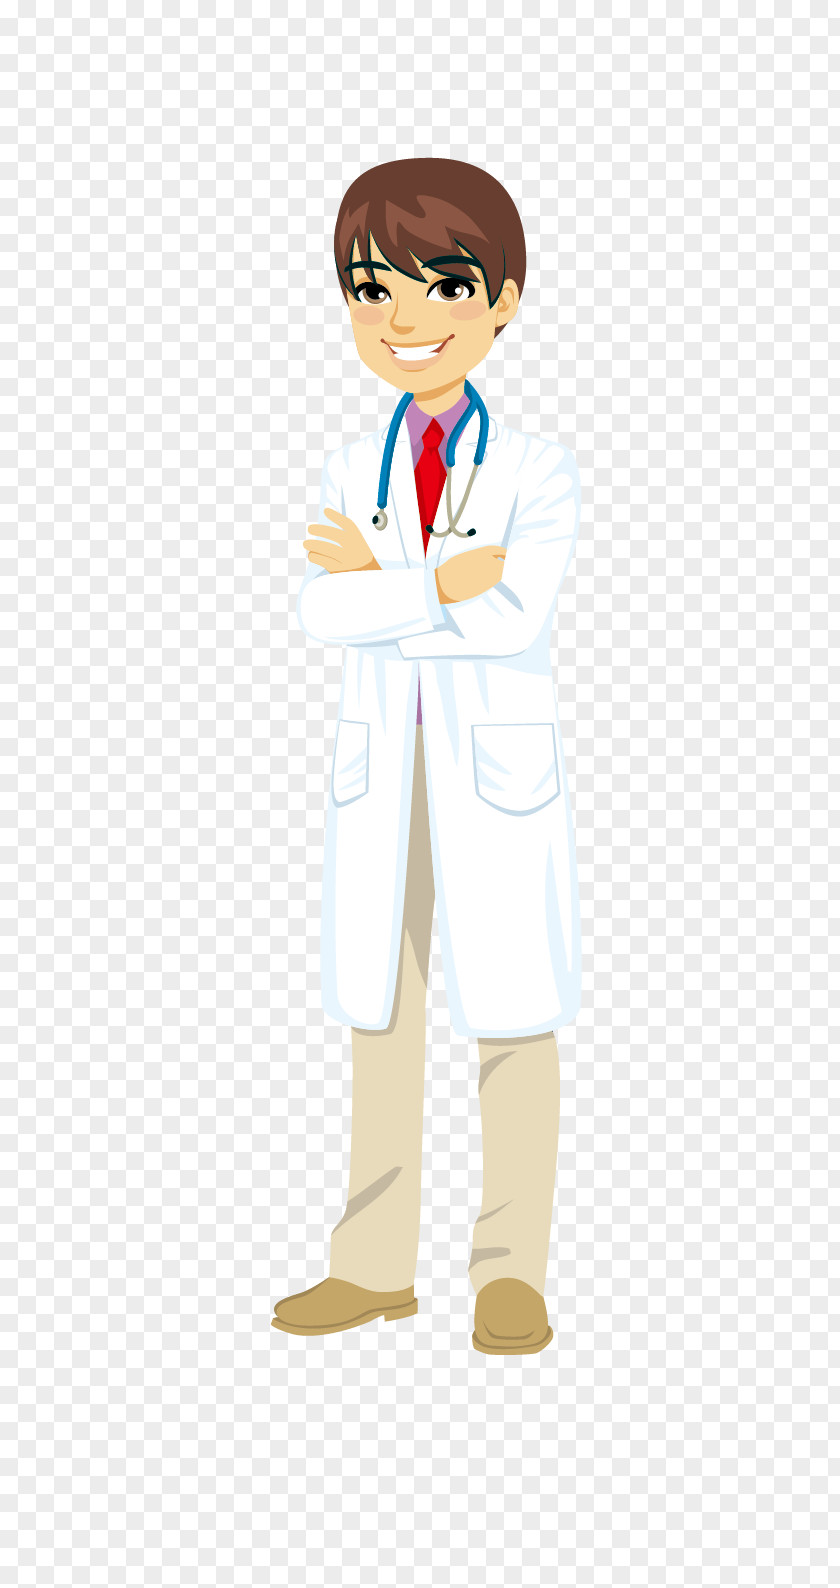 Cartoon Doctor Physician Professional Drawing Illustration PNG